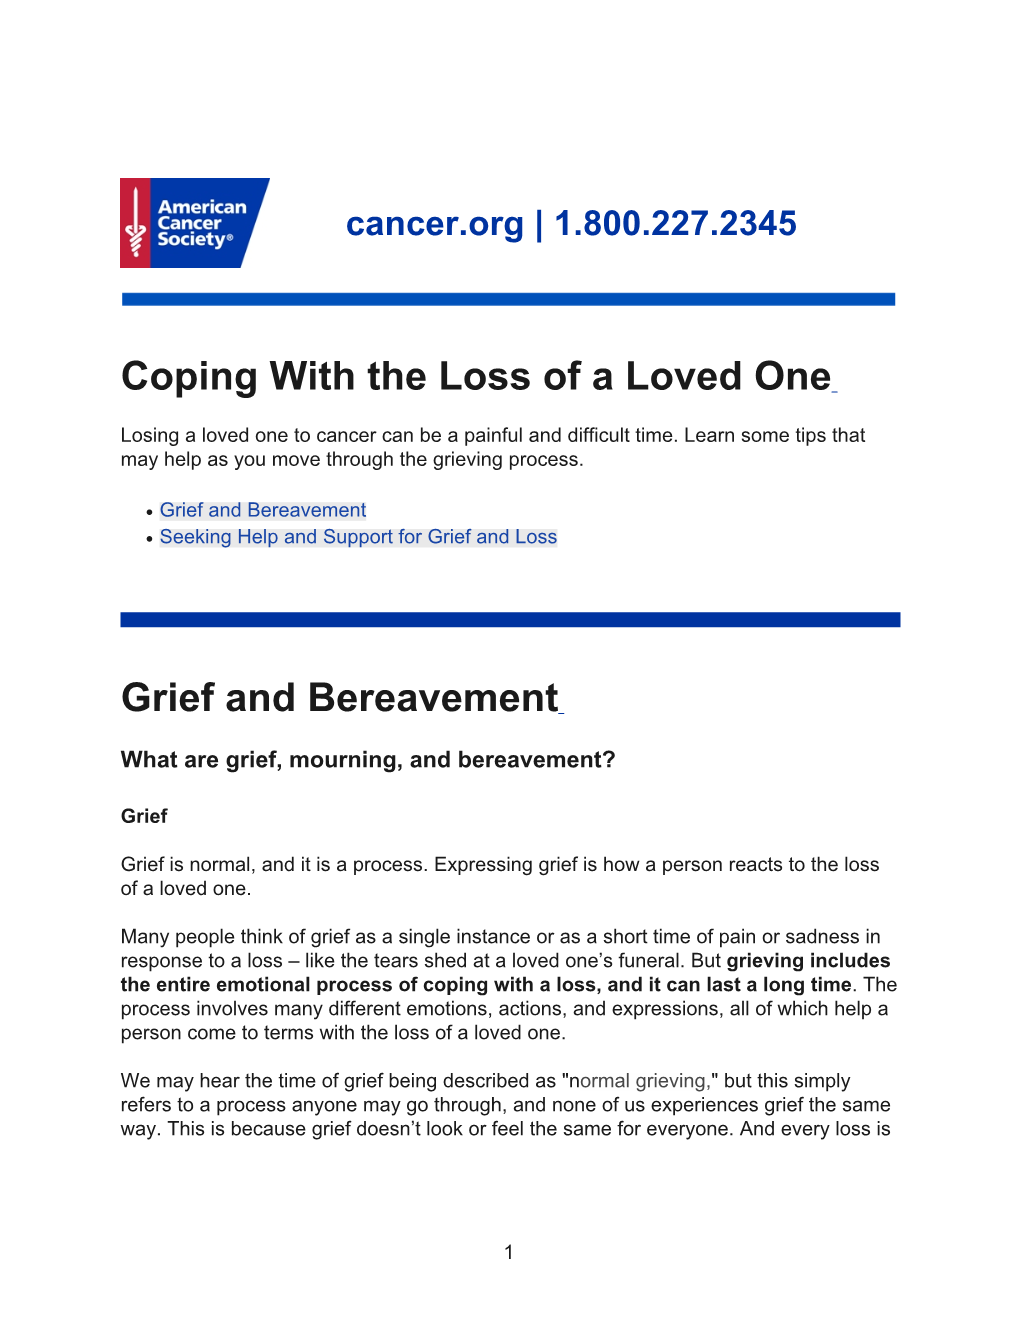 Coping with the Loss of a Loved One Grief and Bereavement